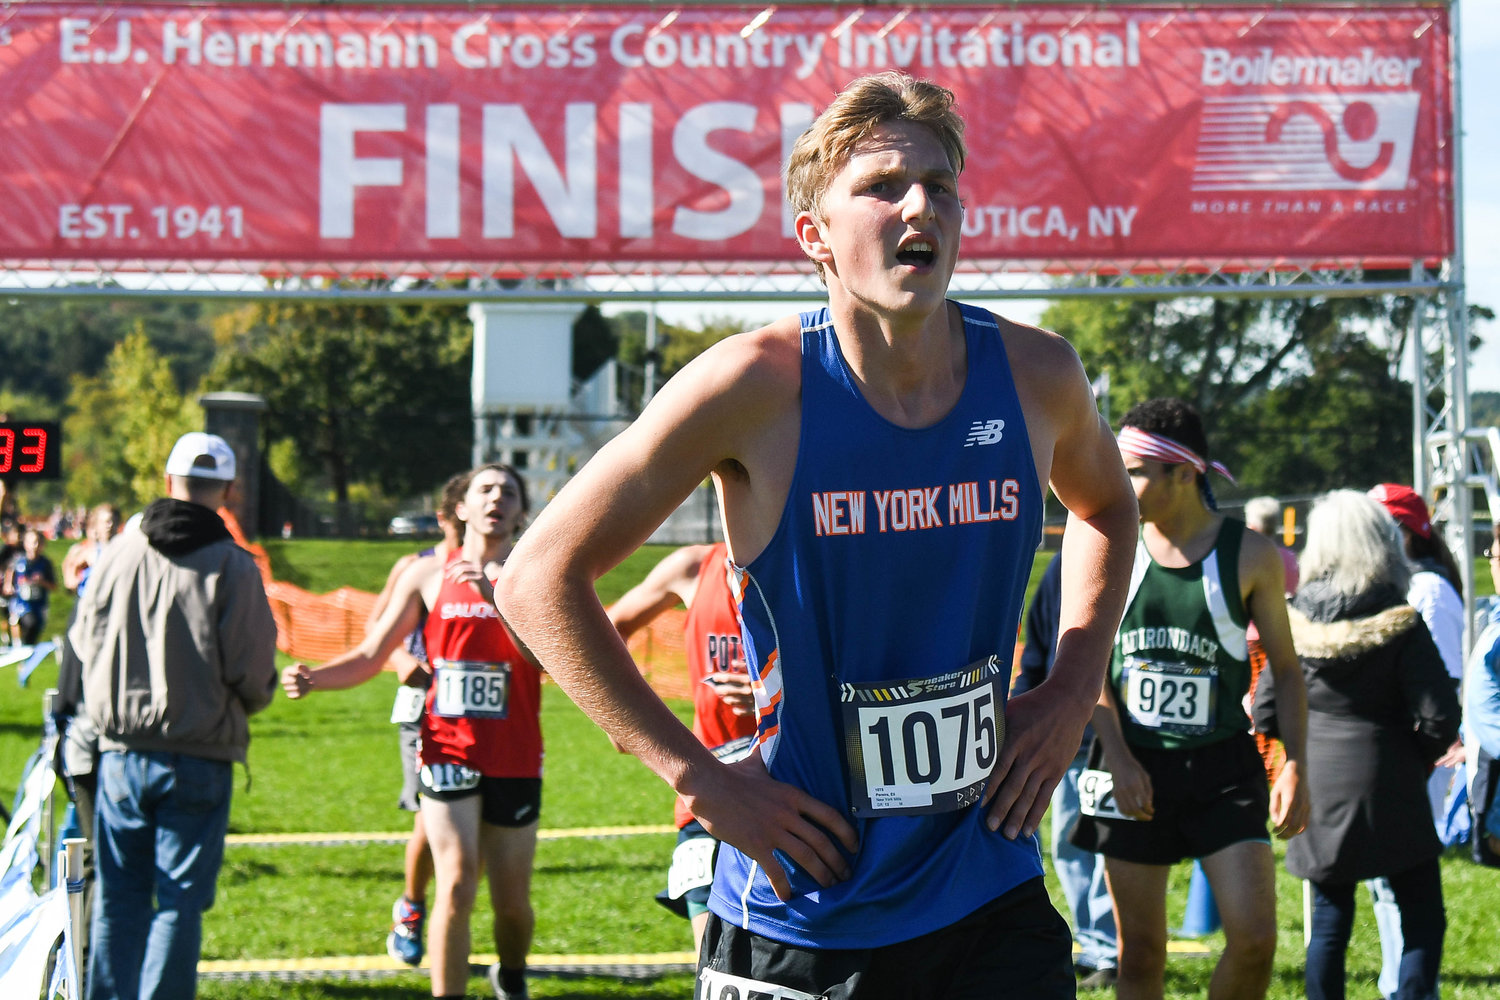 New York Mills runner Eli Pereira catches his breath after crossing the finish line during the 79th E.J. Herrmann Invitational on Saturday at Proctor Park in Utica. He finished 96th out of 171 runners in the boys varsity race.